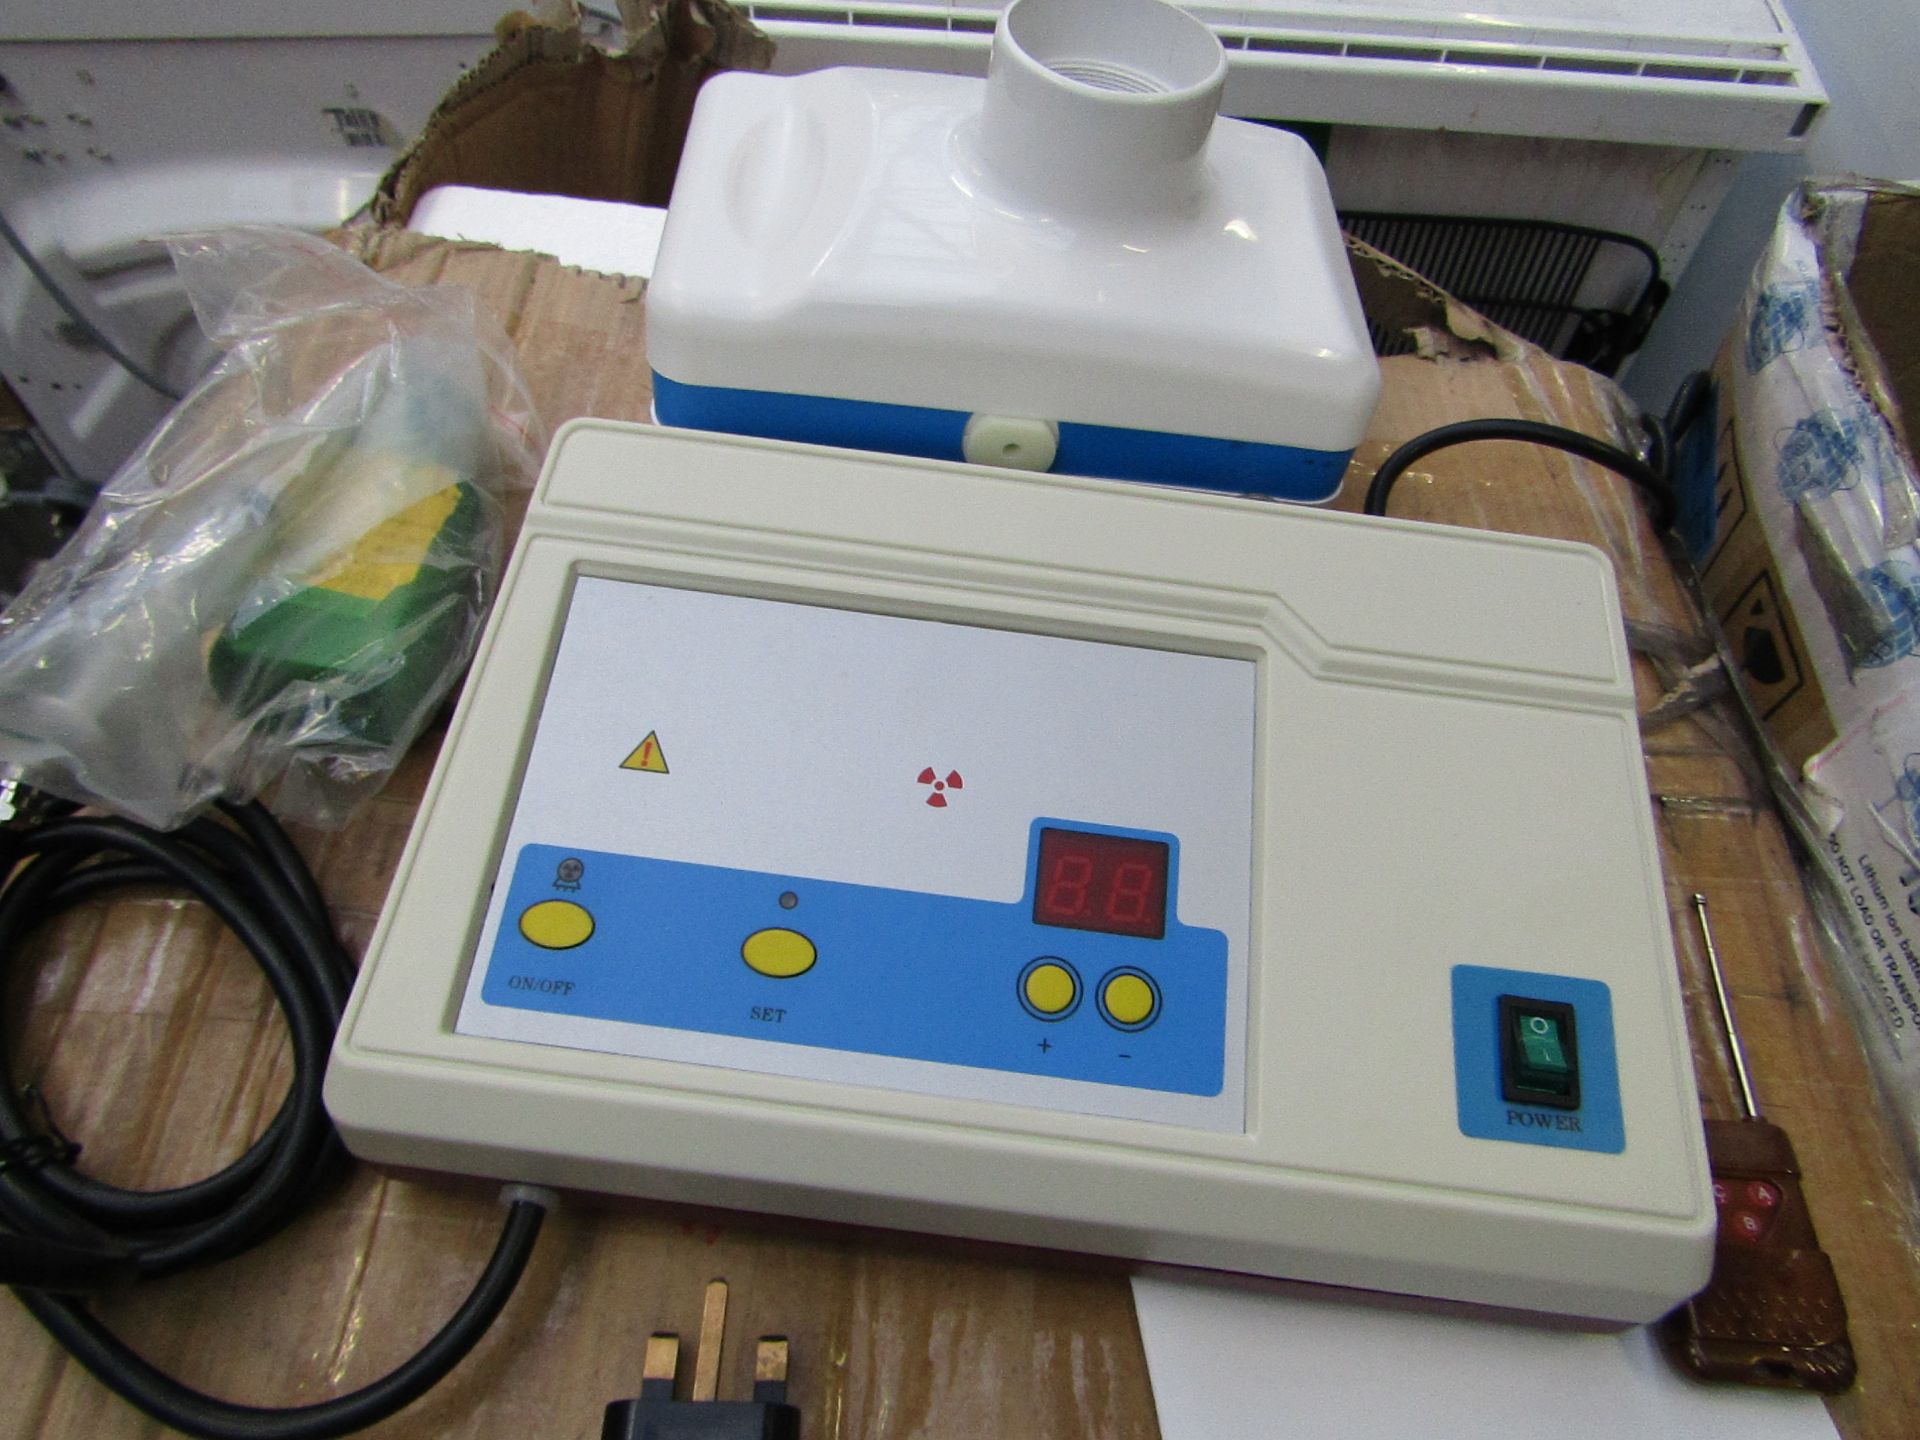 Portable Dental X-ray machine, accessories included, untested and boxed.